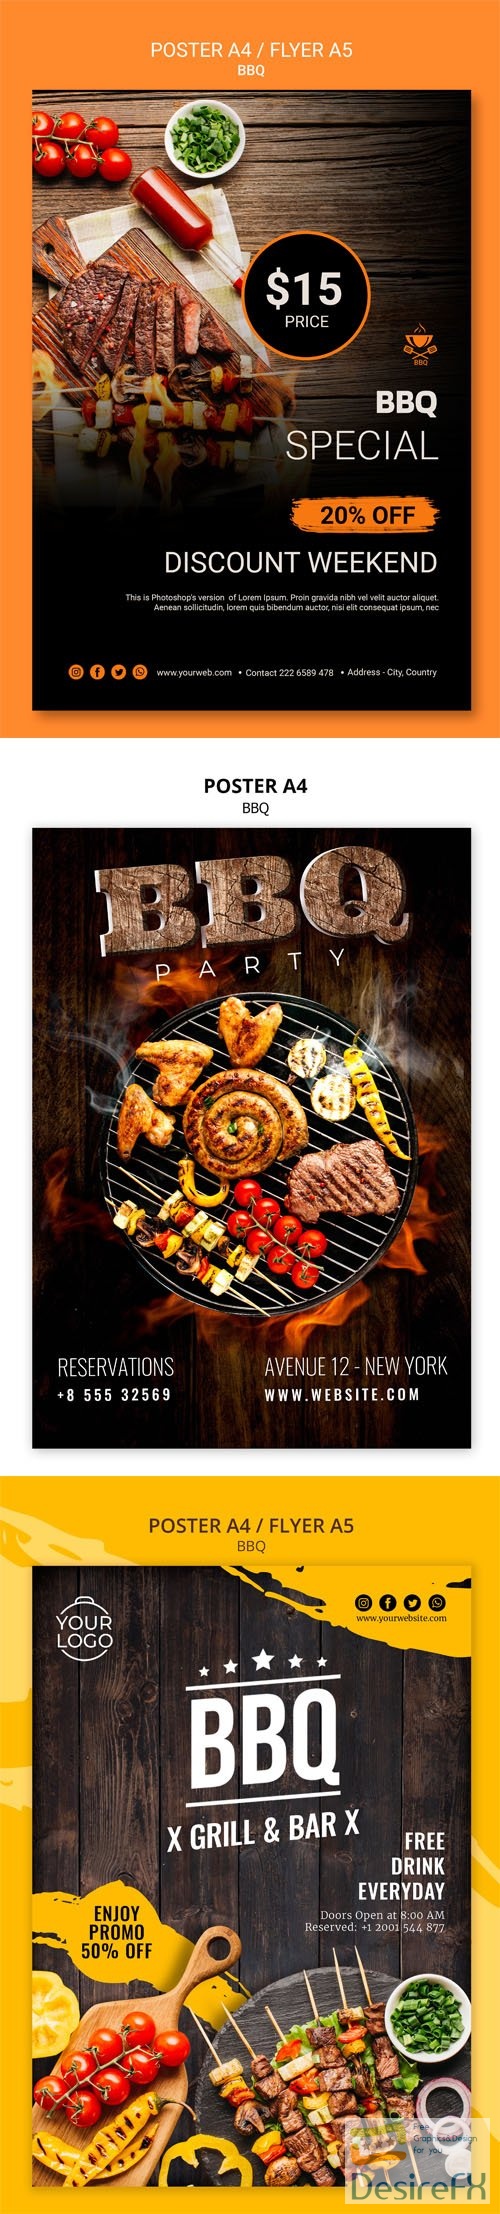 Barbeque BBQ Poster A4 / Flyer A5 PSD Templates